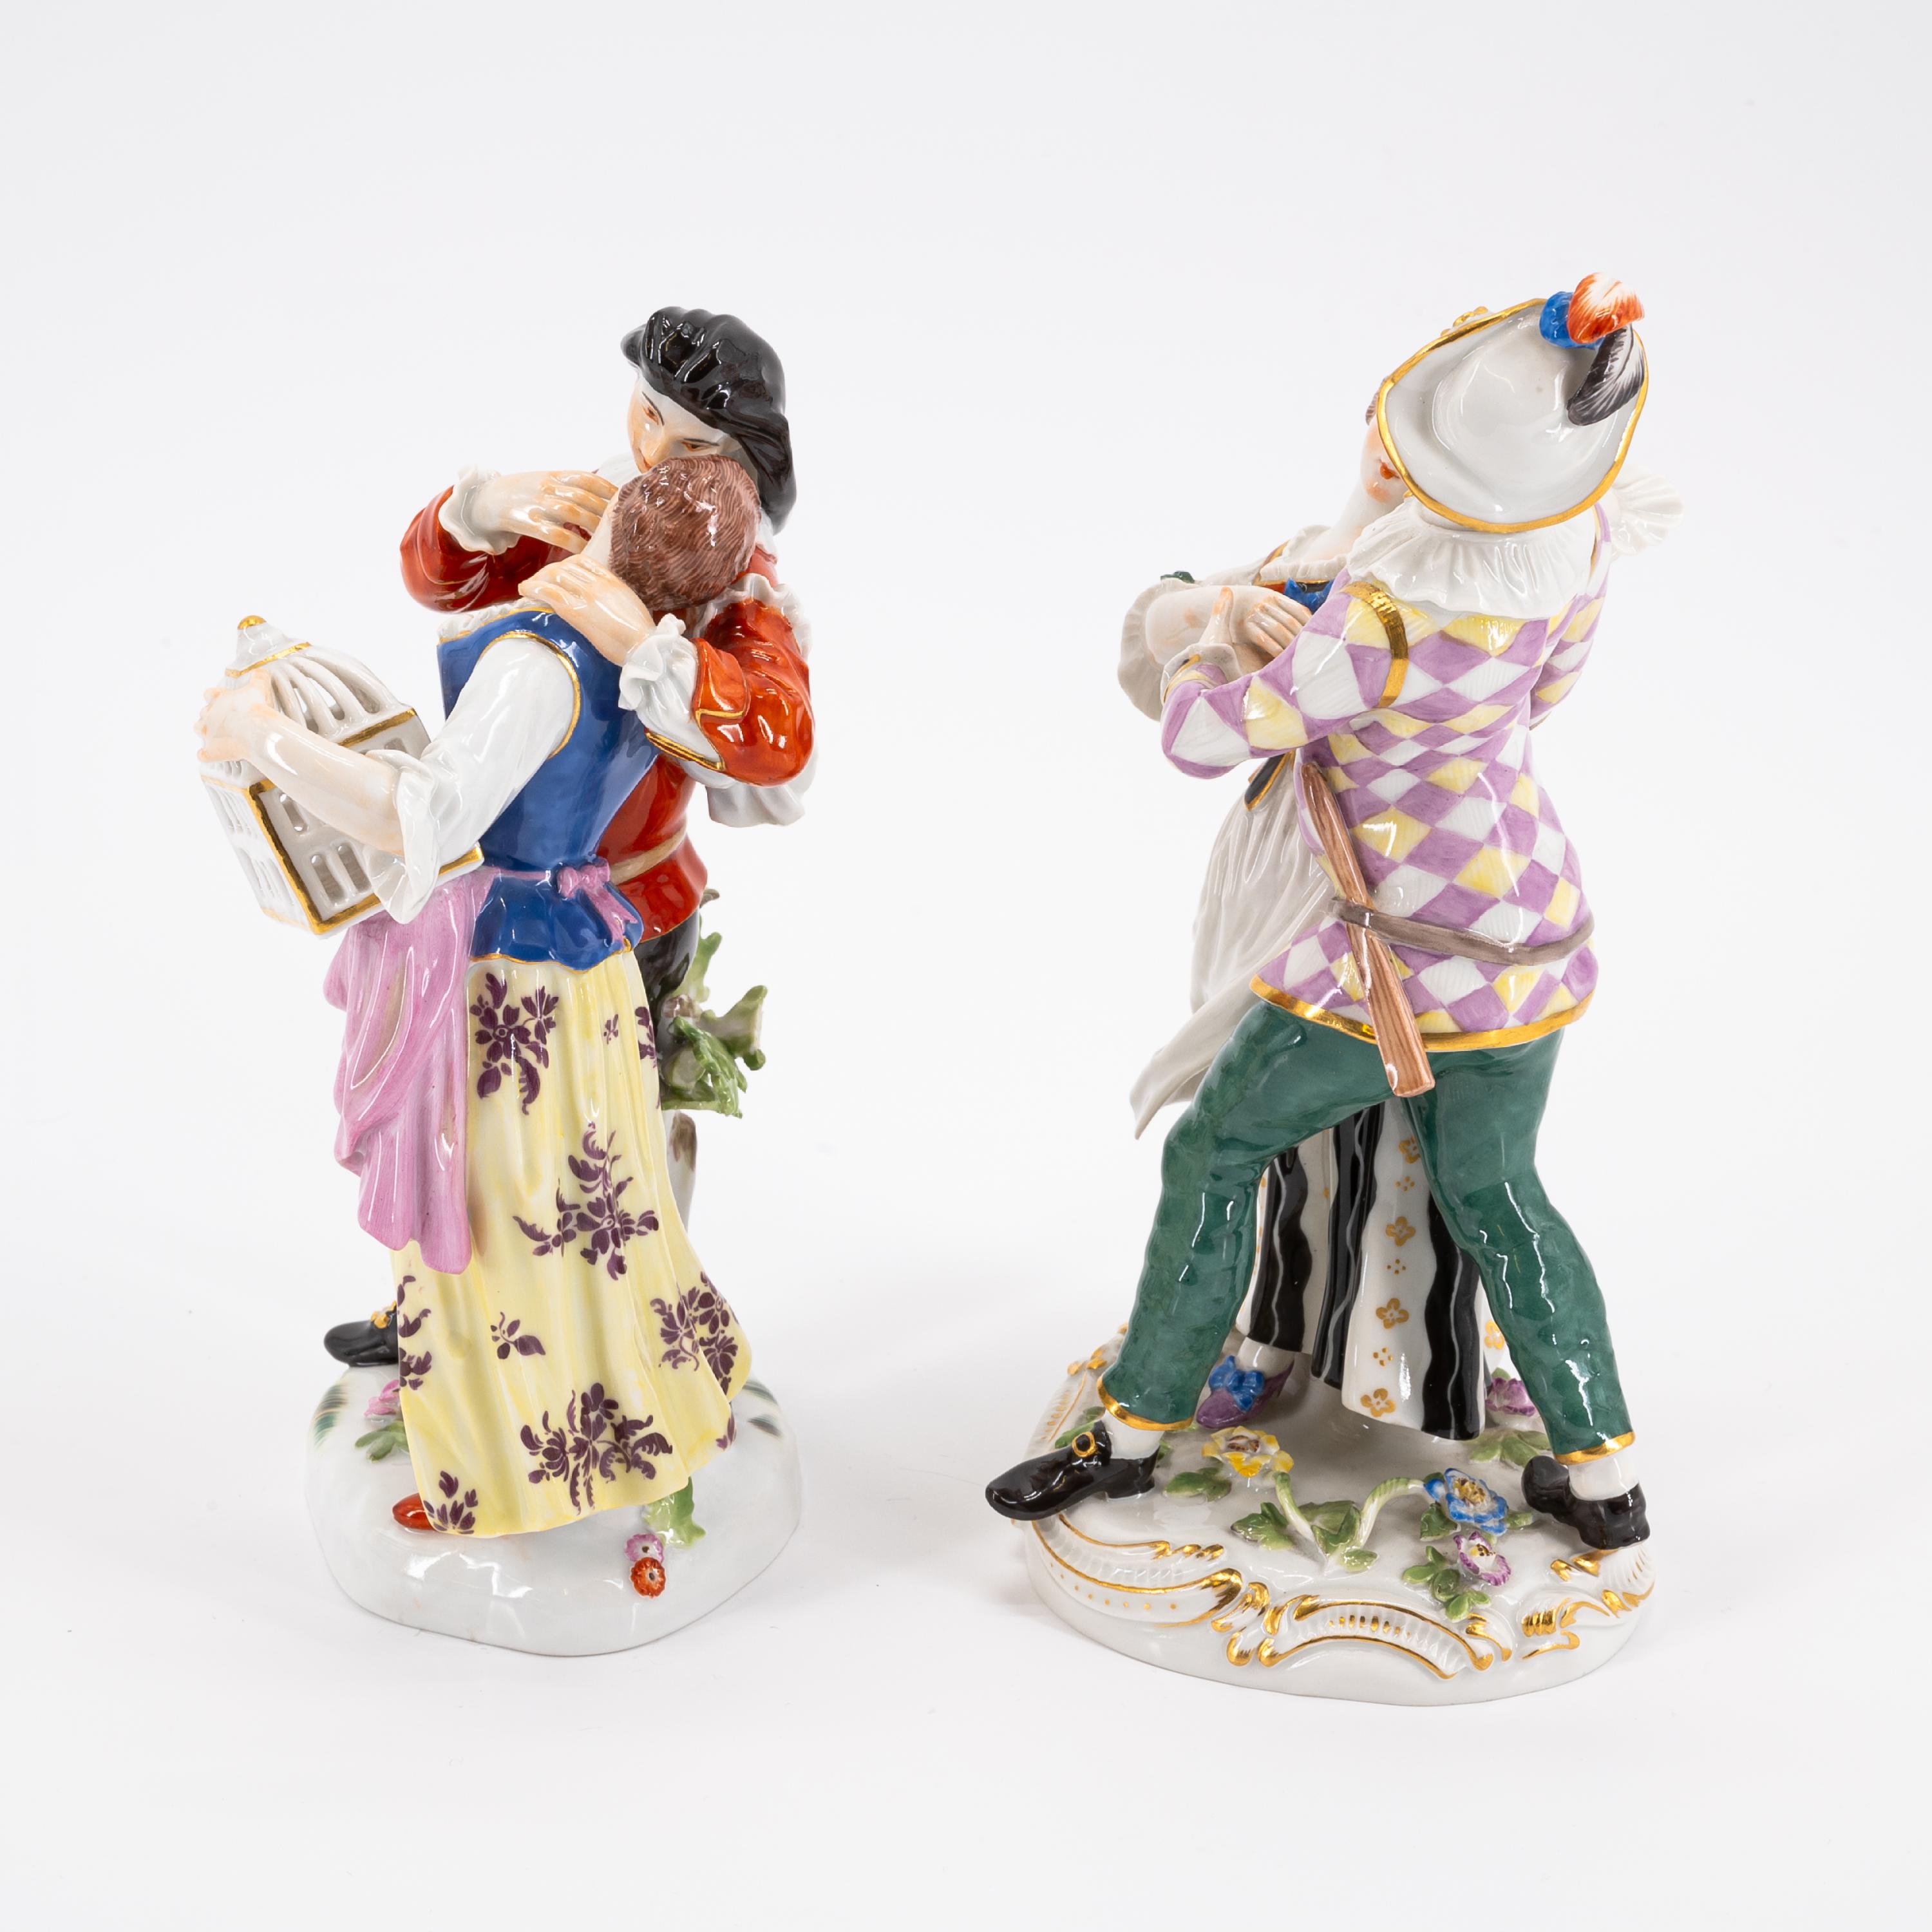 FOUR LARGE PORCELAIN COUPLES FROM THE COMMEDIA DELL'ARTE - Image 2 of 9